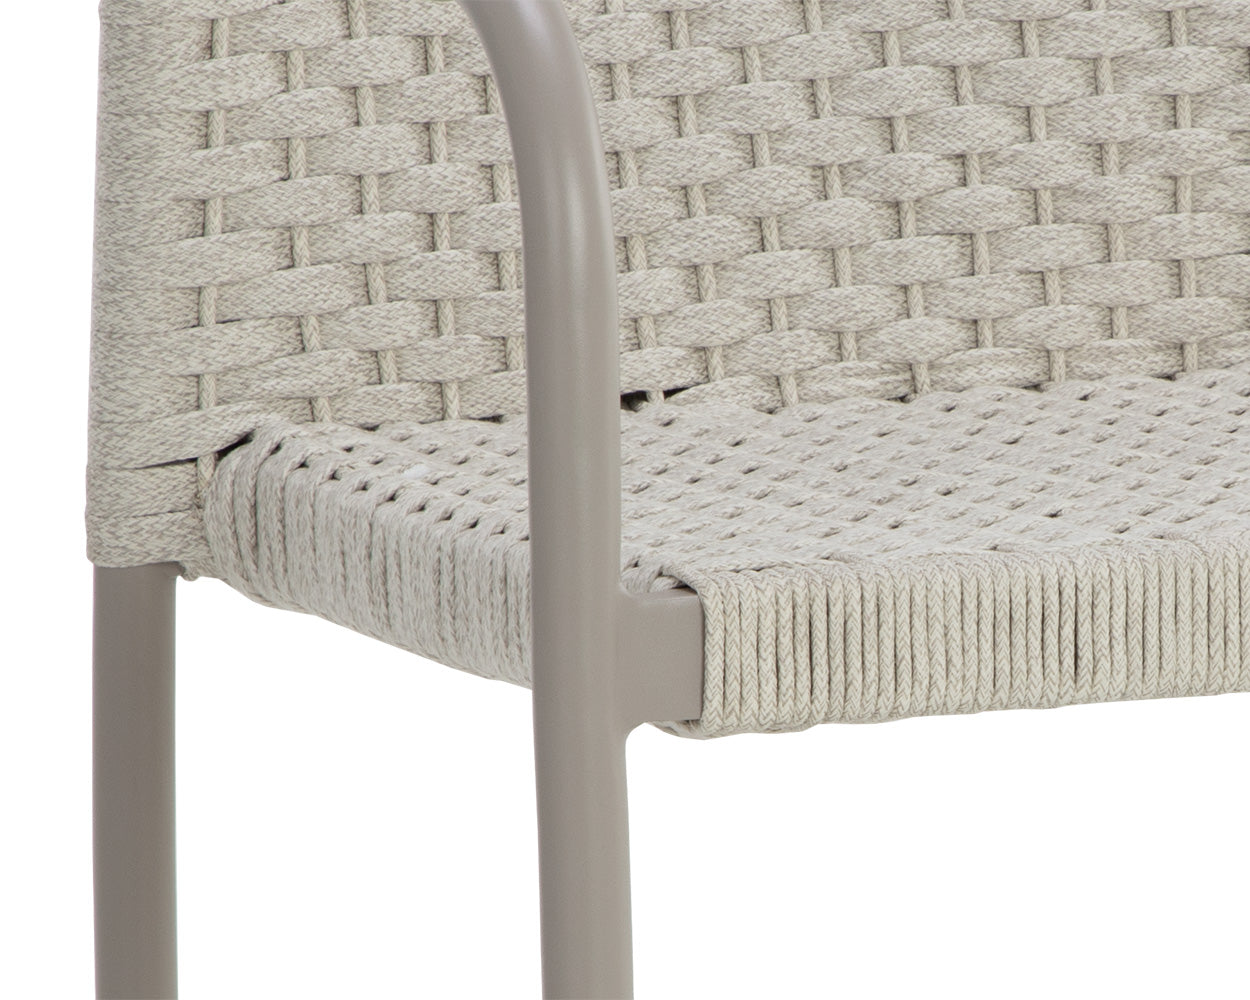 Casella Stackable Dining Armchair